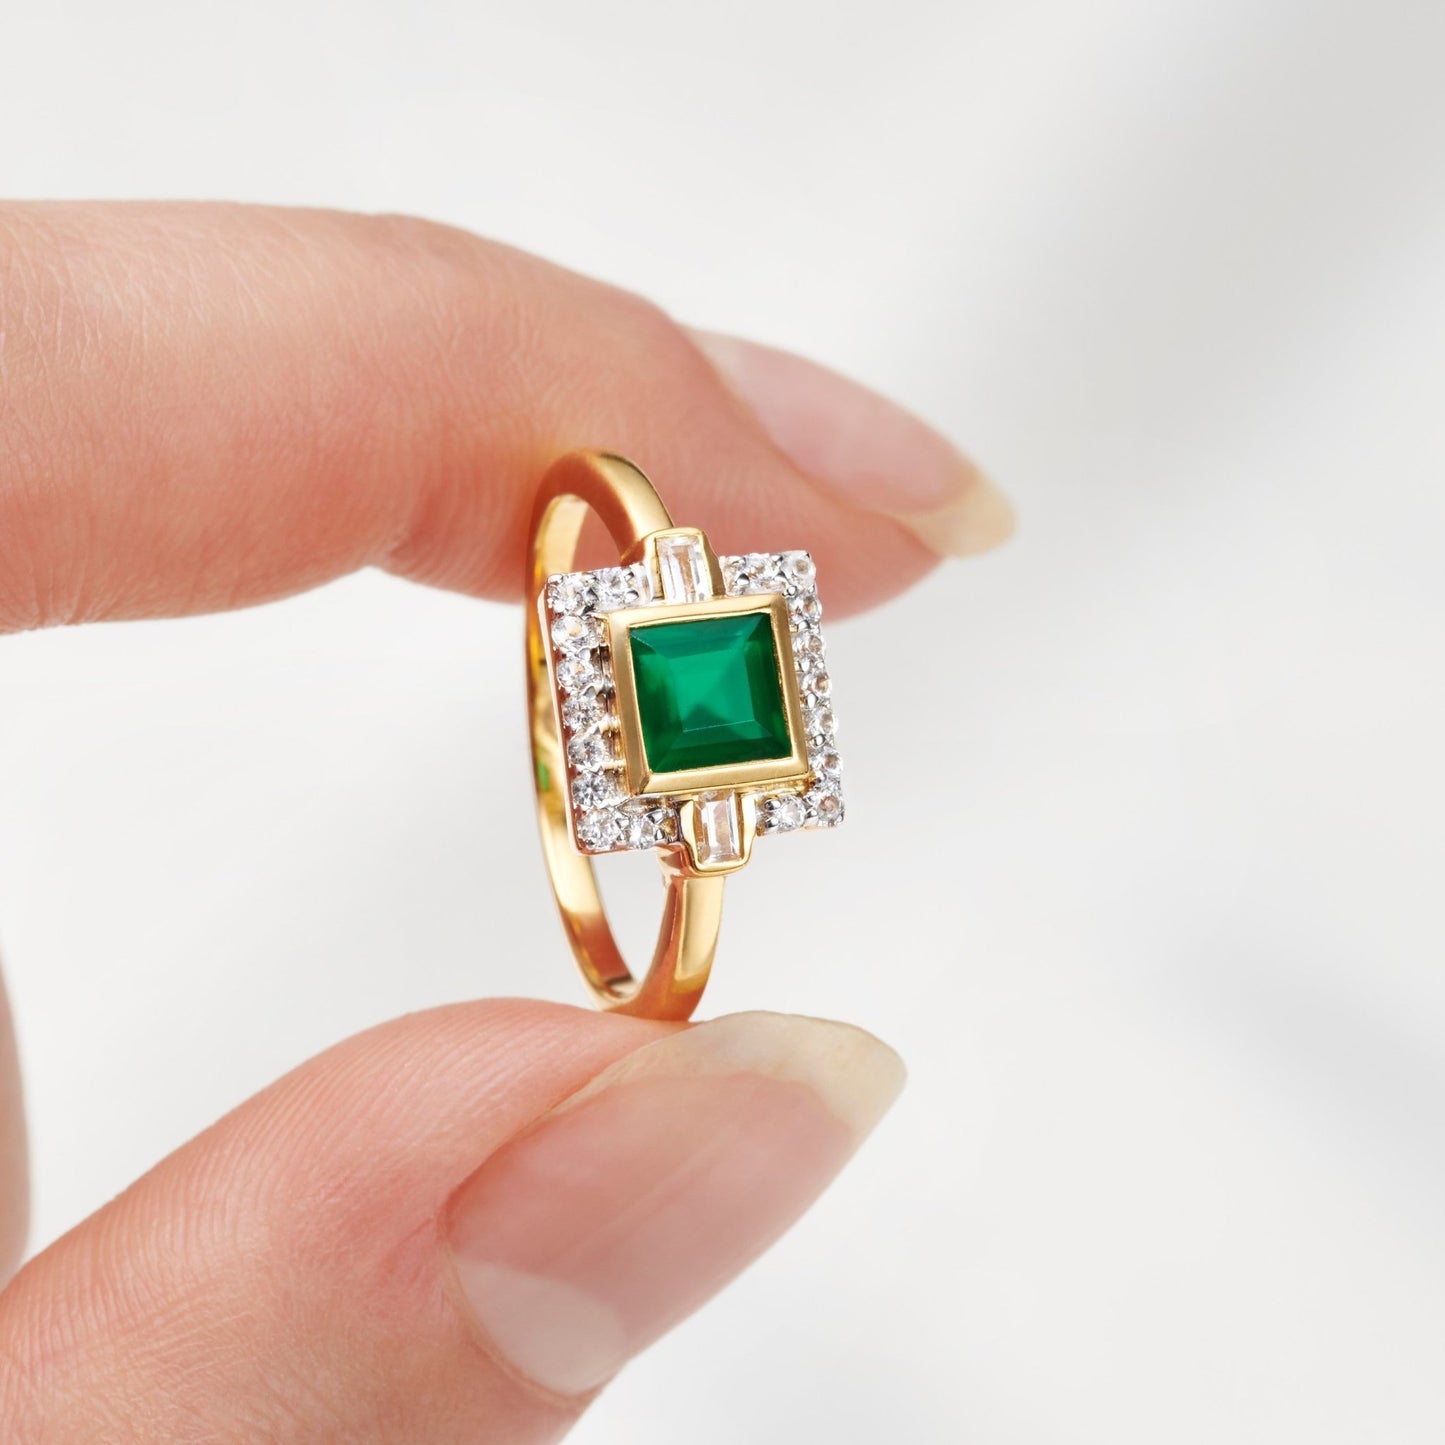 9CT YELLOW GOLD GREEN ONYX VINTAGE STYLE RING - Fool's Gold Jewellery